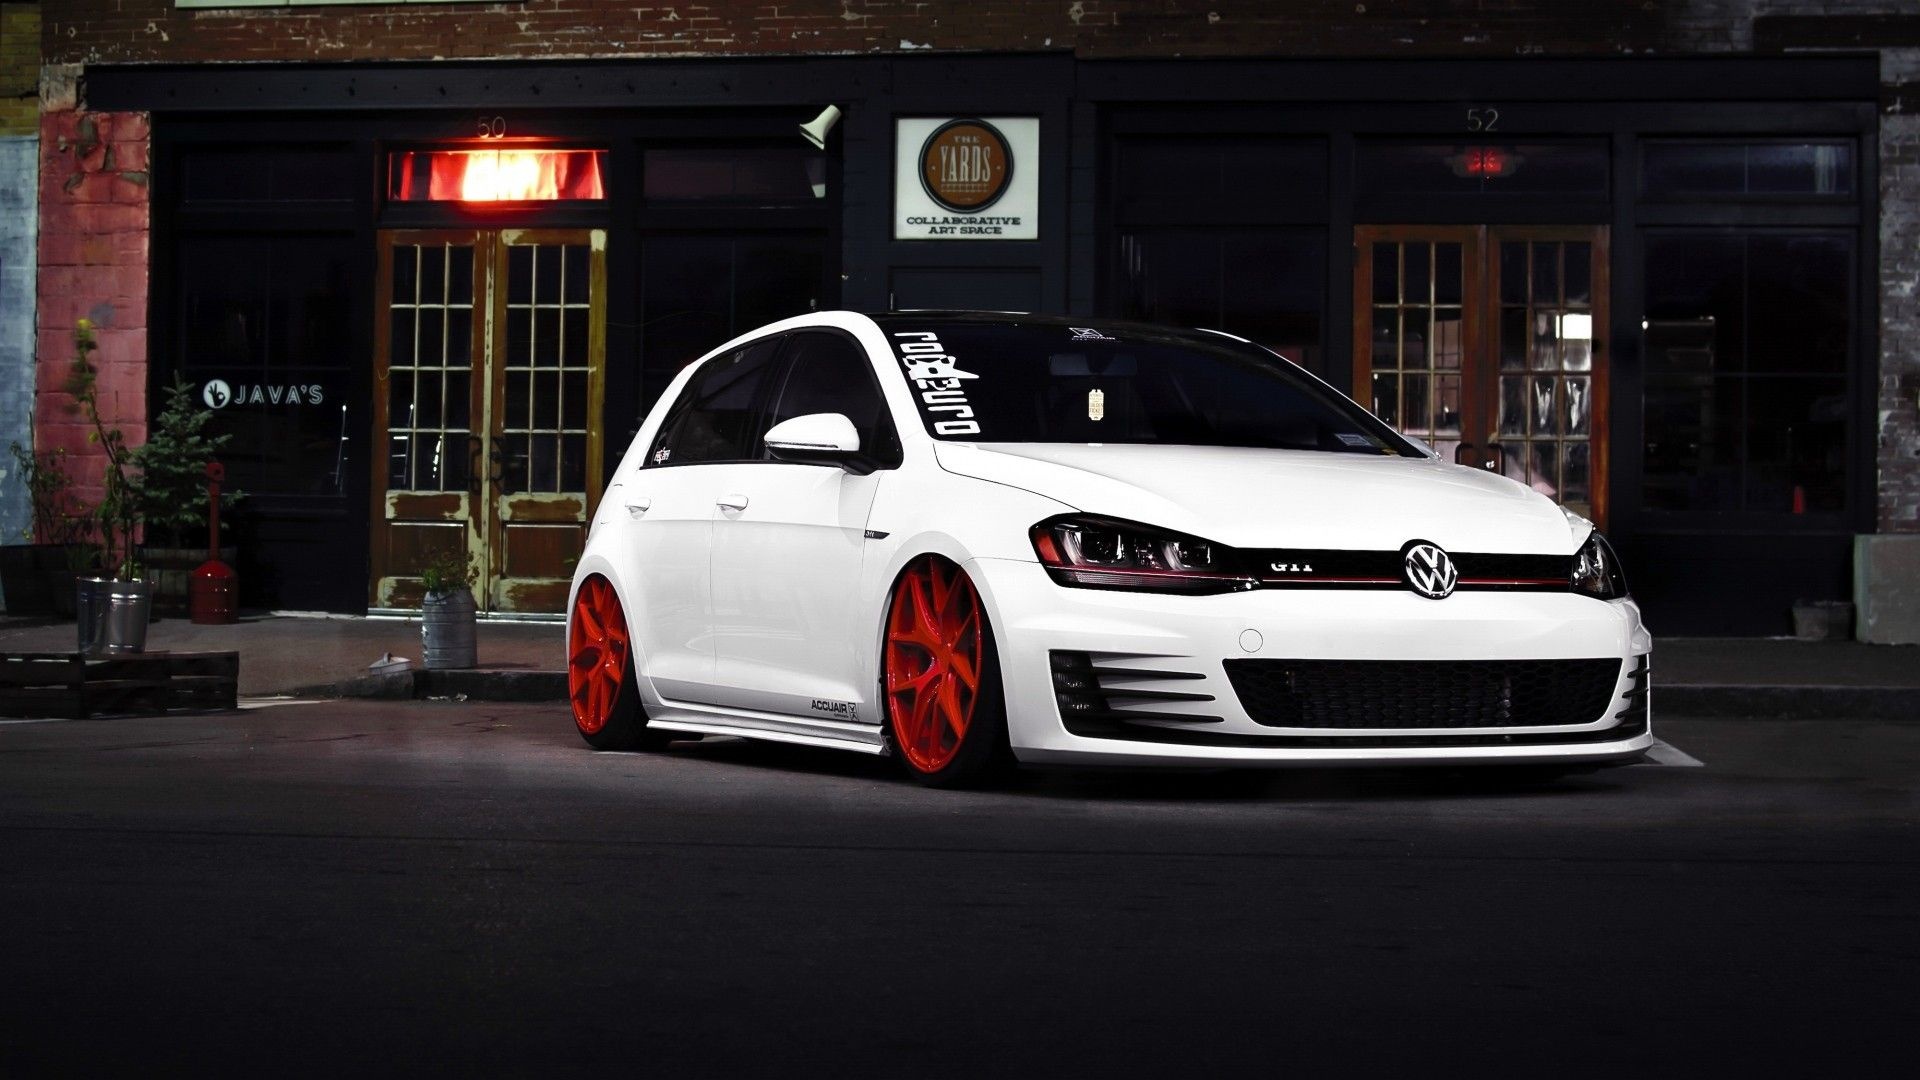 GTI car, Volkswagen Golf, Speed and style, Performance vehicle, 1920x1080 Full HD Desktop